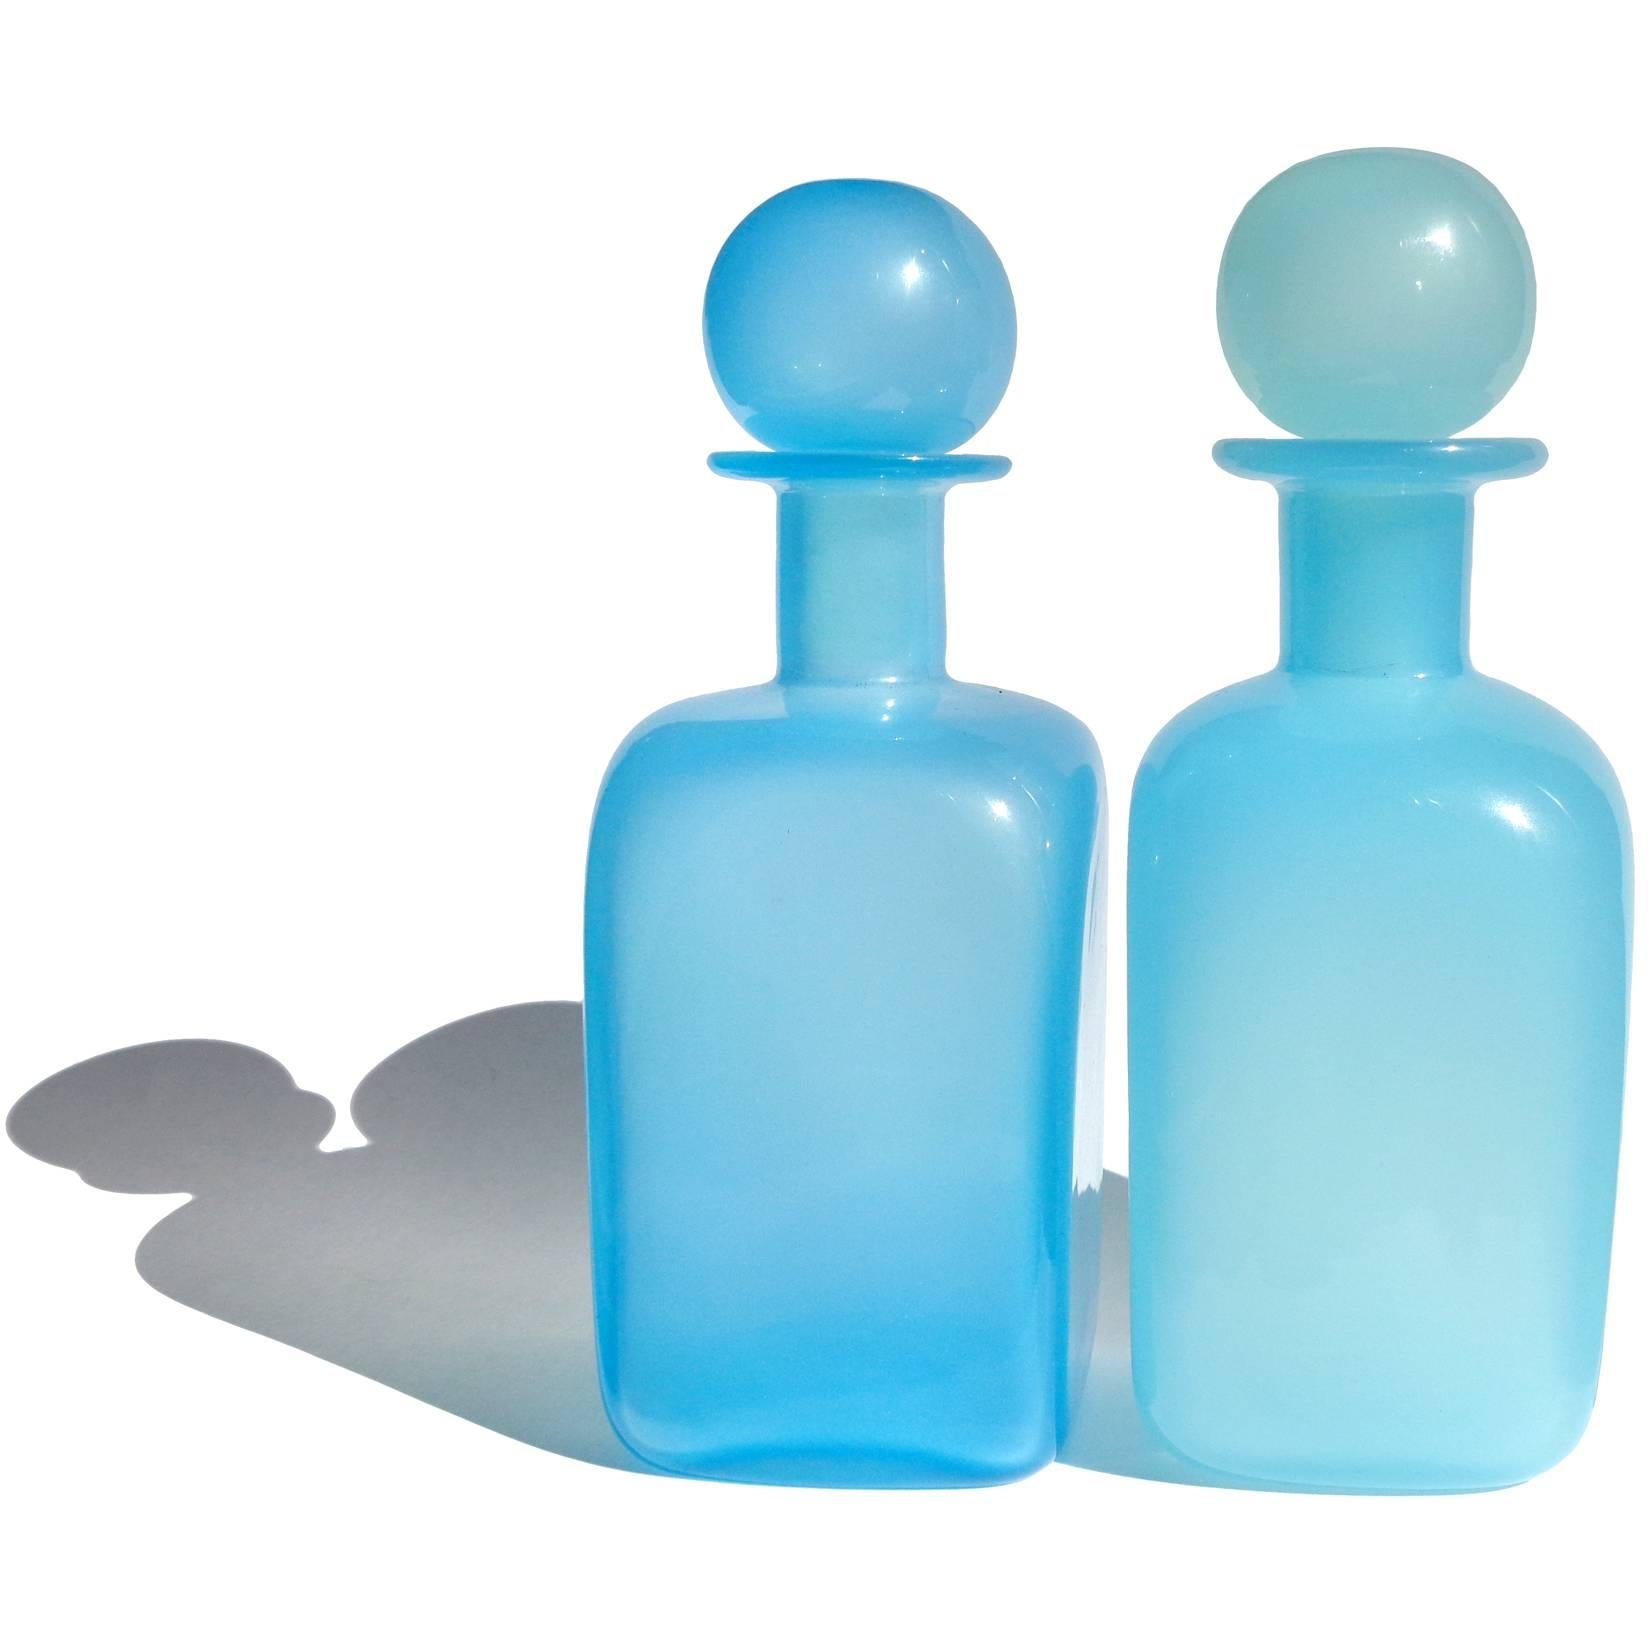 Free shipping worldwide! See details below description.

Amazing set of Murano handblown pink, green, and blue opalescent art glass decanters / bottles. Documented to designer Archimede Seguso. The green bottle has 3 original labels still